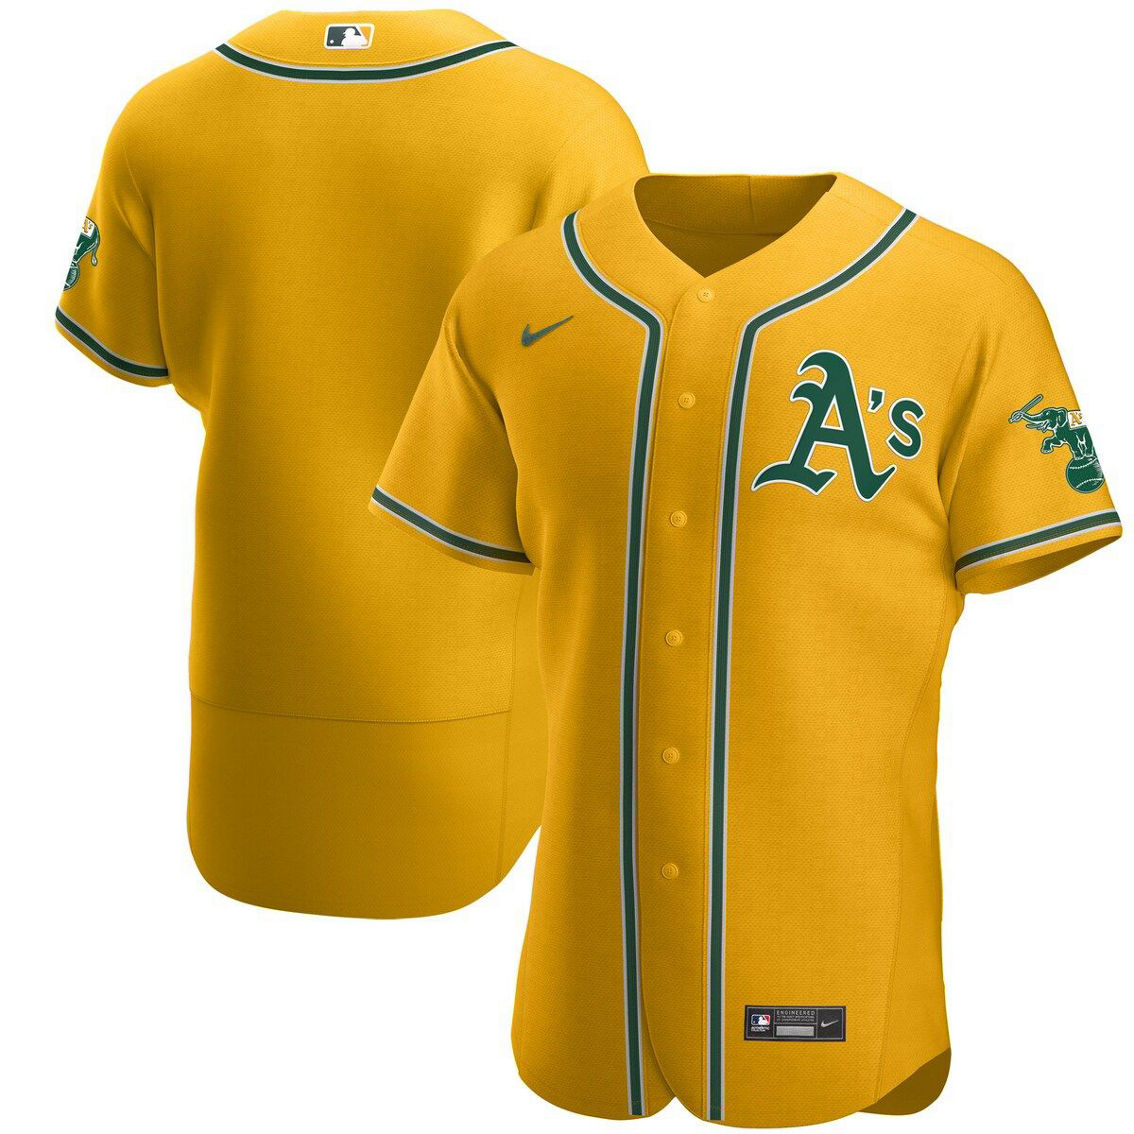 Nike Men's Gold Oakland Athletics Authentic Official Team Jersey - Image 2 of 4